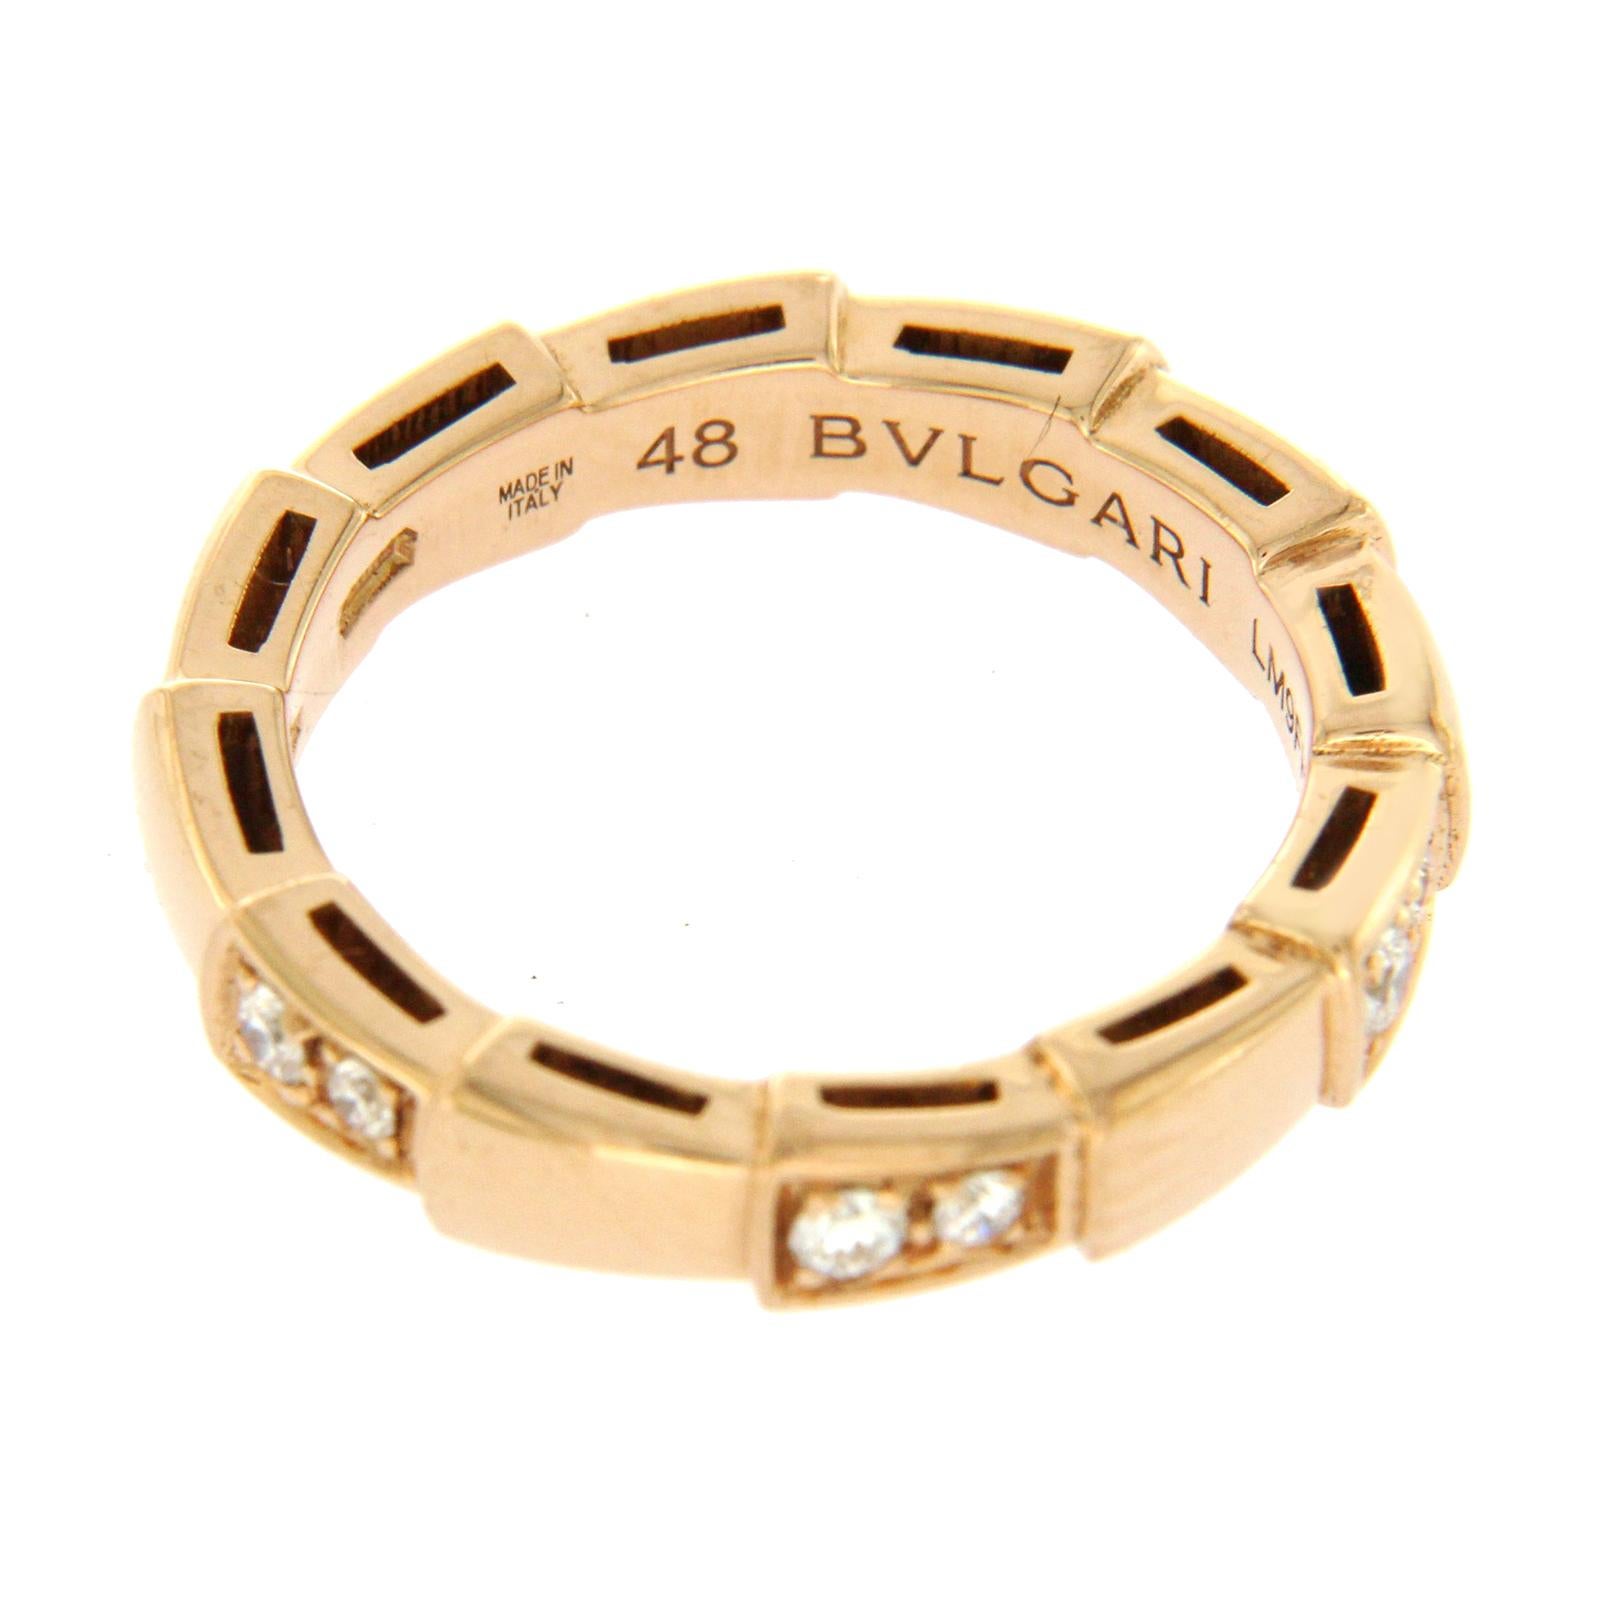 Type: Ring
Top: 3.5 mm
Band Width: 3.5 mm
Metal: Rose Gold
Metal Purity: 18K
Size:4.5
Hallmarks: BVLGARI 750 48
Total Weight: 4.2 GramsStone 
Type: 0.25 CT & VVSI F Diamonds
Condition: Pre Owned
Stock Number: U55
Retail Price:$2450